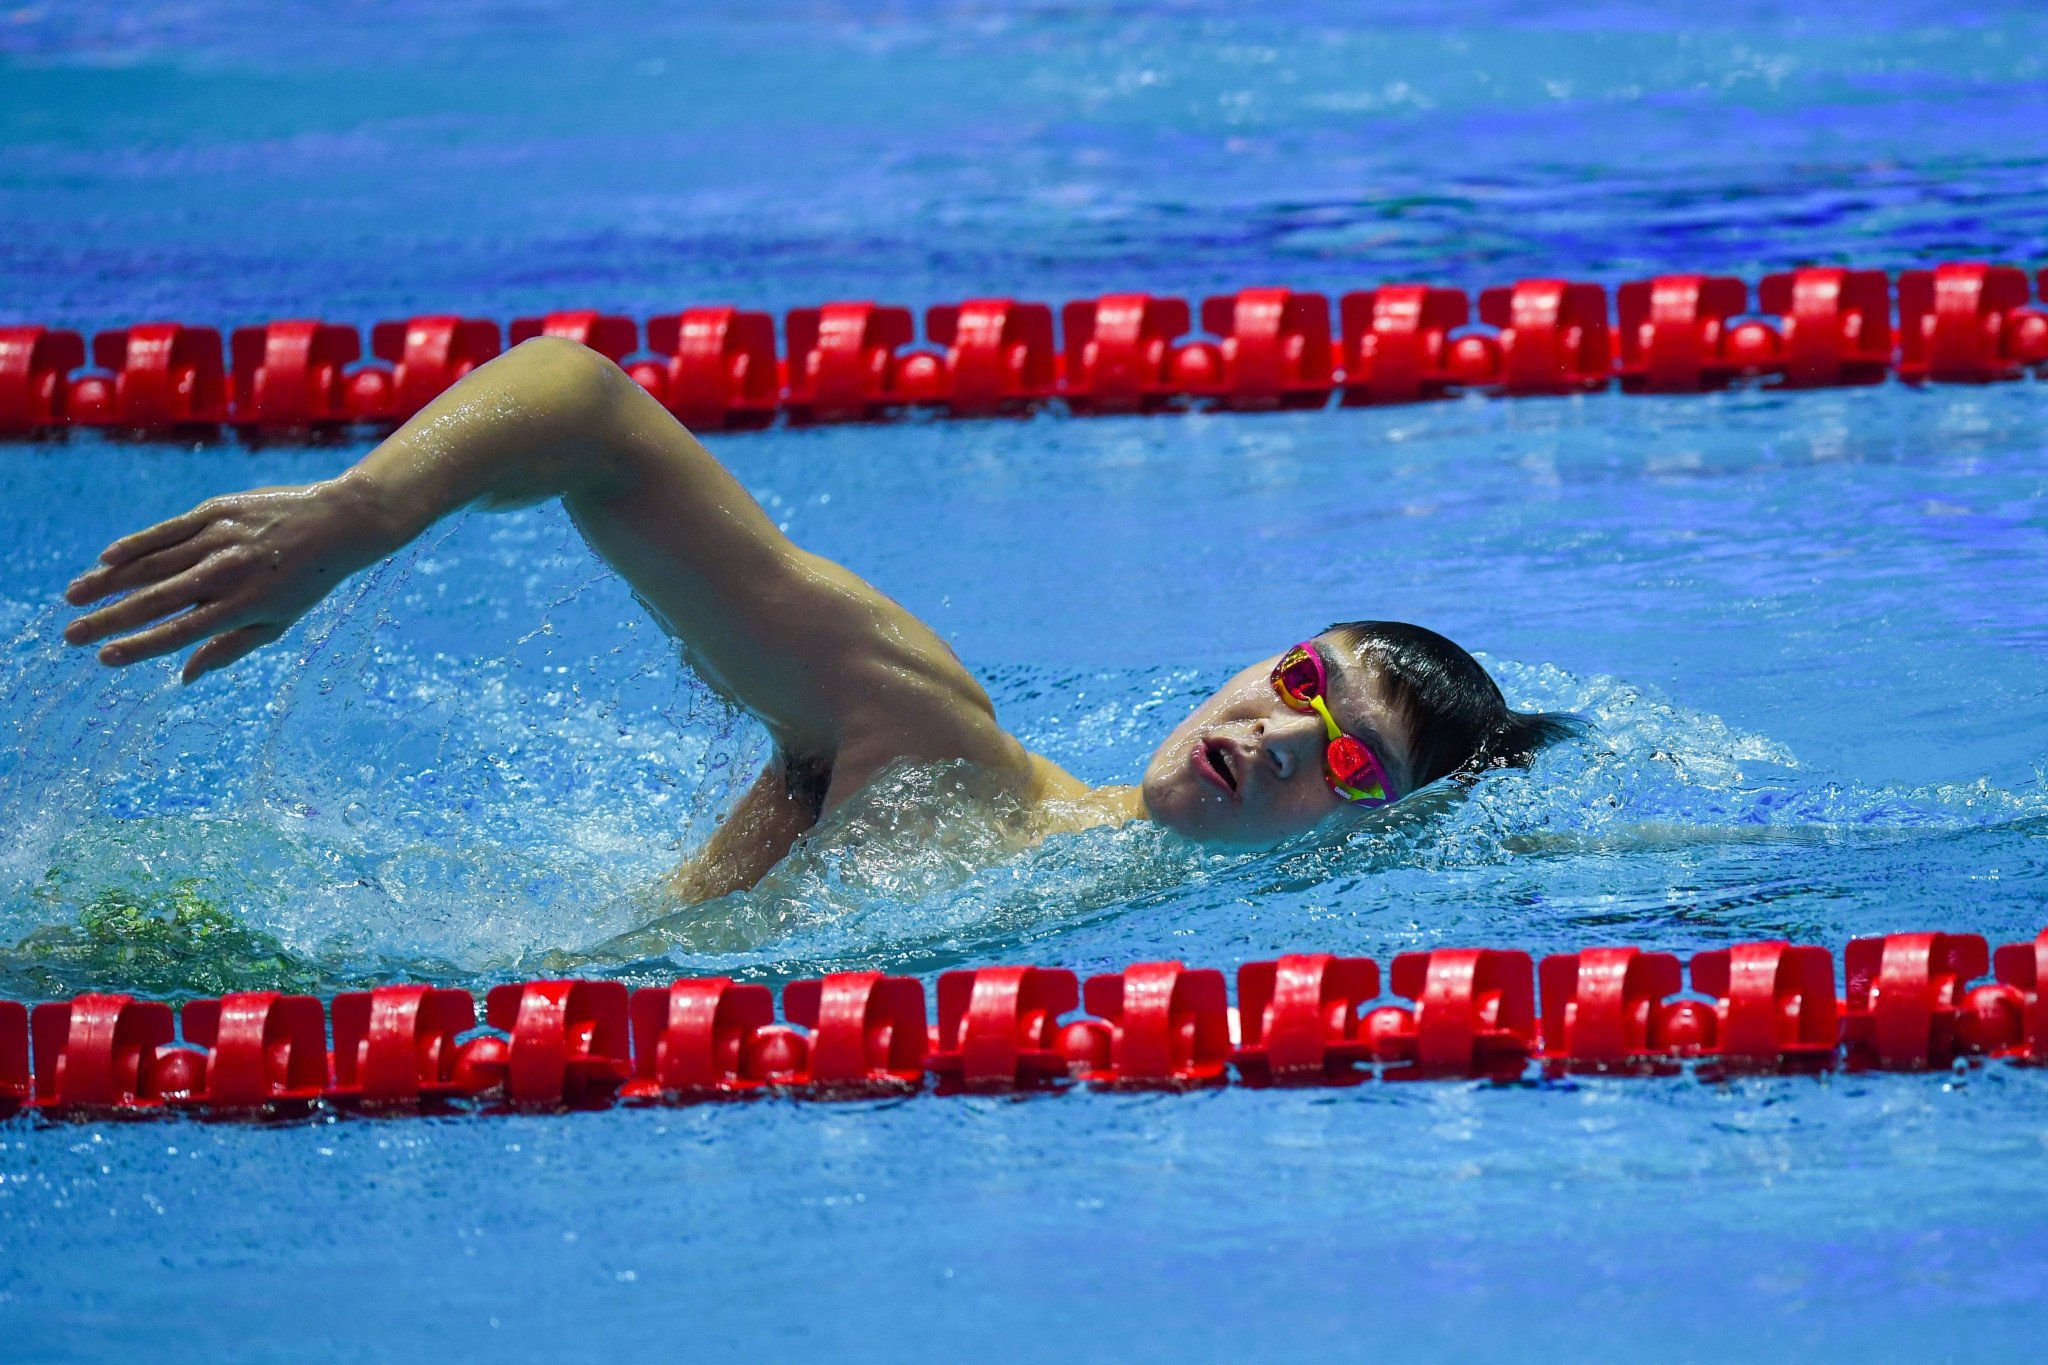 The International Swimming Federation issued China's Sun Yang with a warning after the controversial swimmer allegedly smashed a blood sample during a doping test earlier this year ©Getty Images 